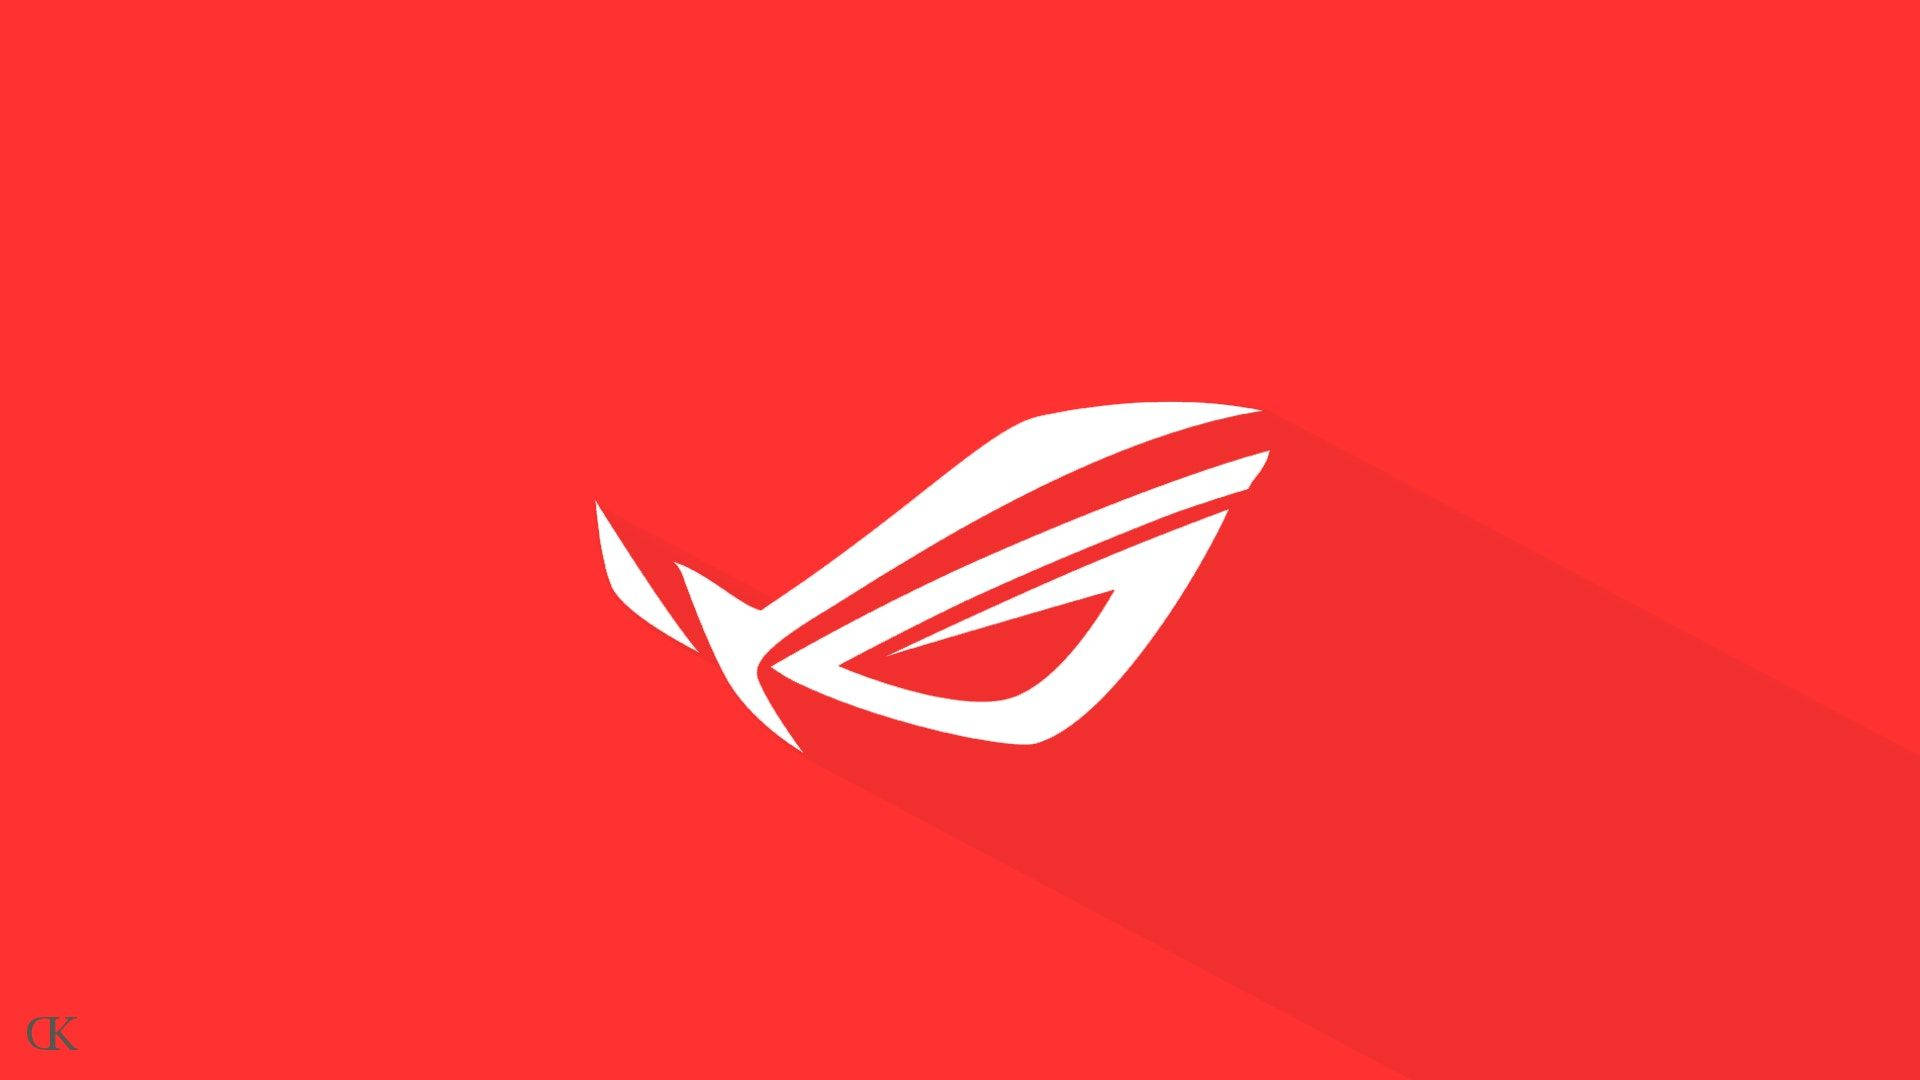 Dynamic Red And White Rog Wallpaper. Background